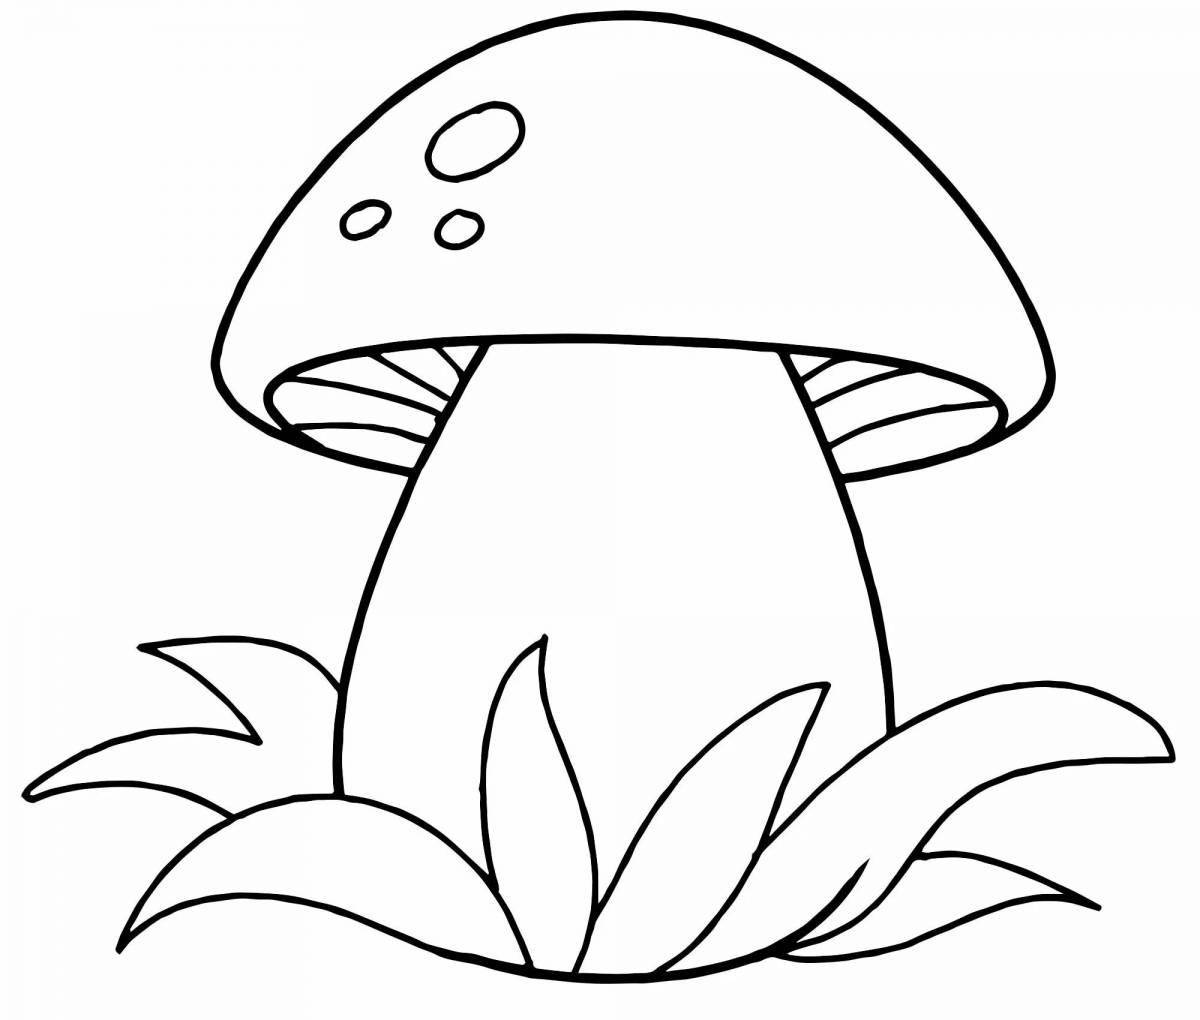 Mushroom coloring pages for 3-4 year olds